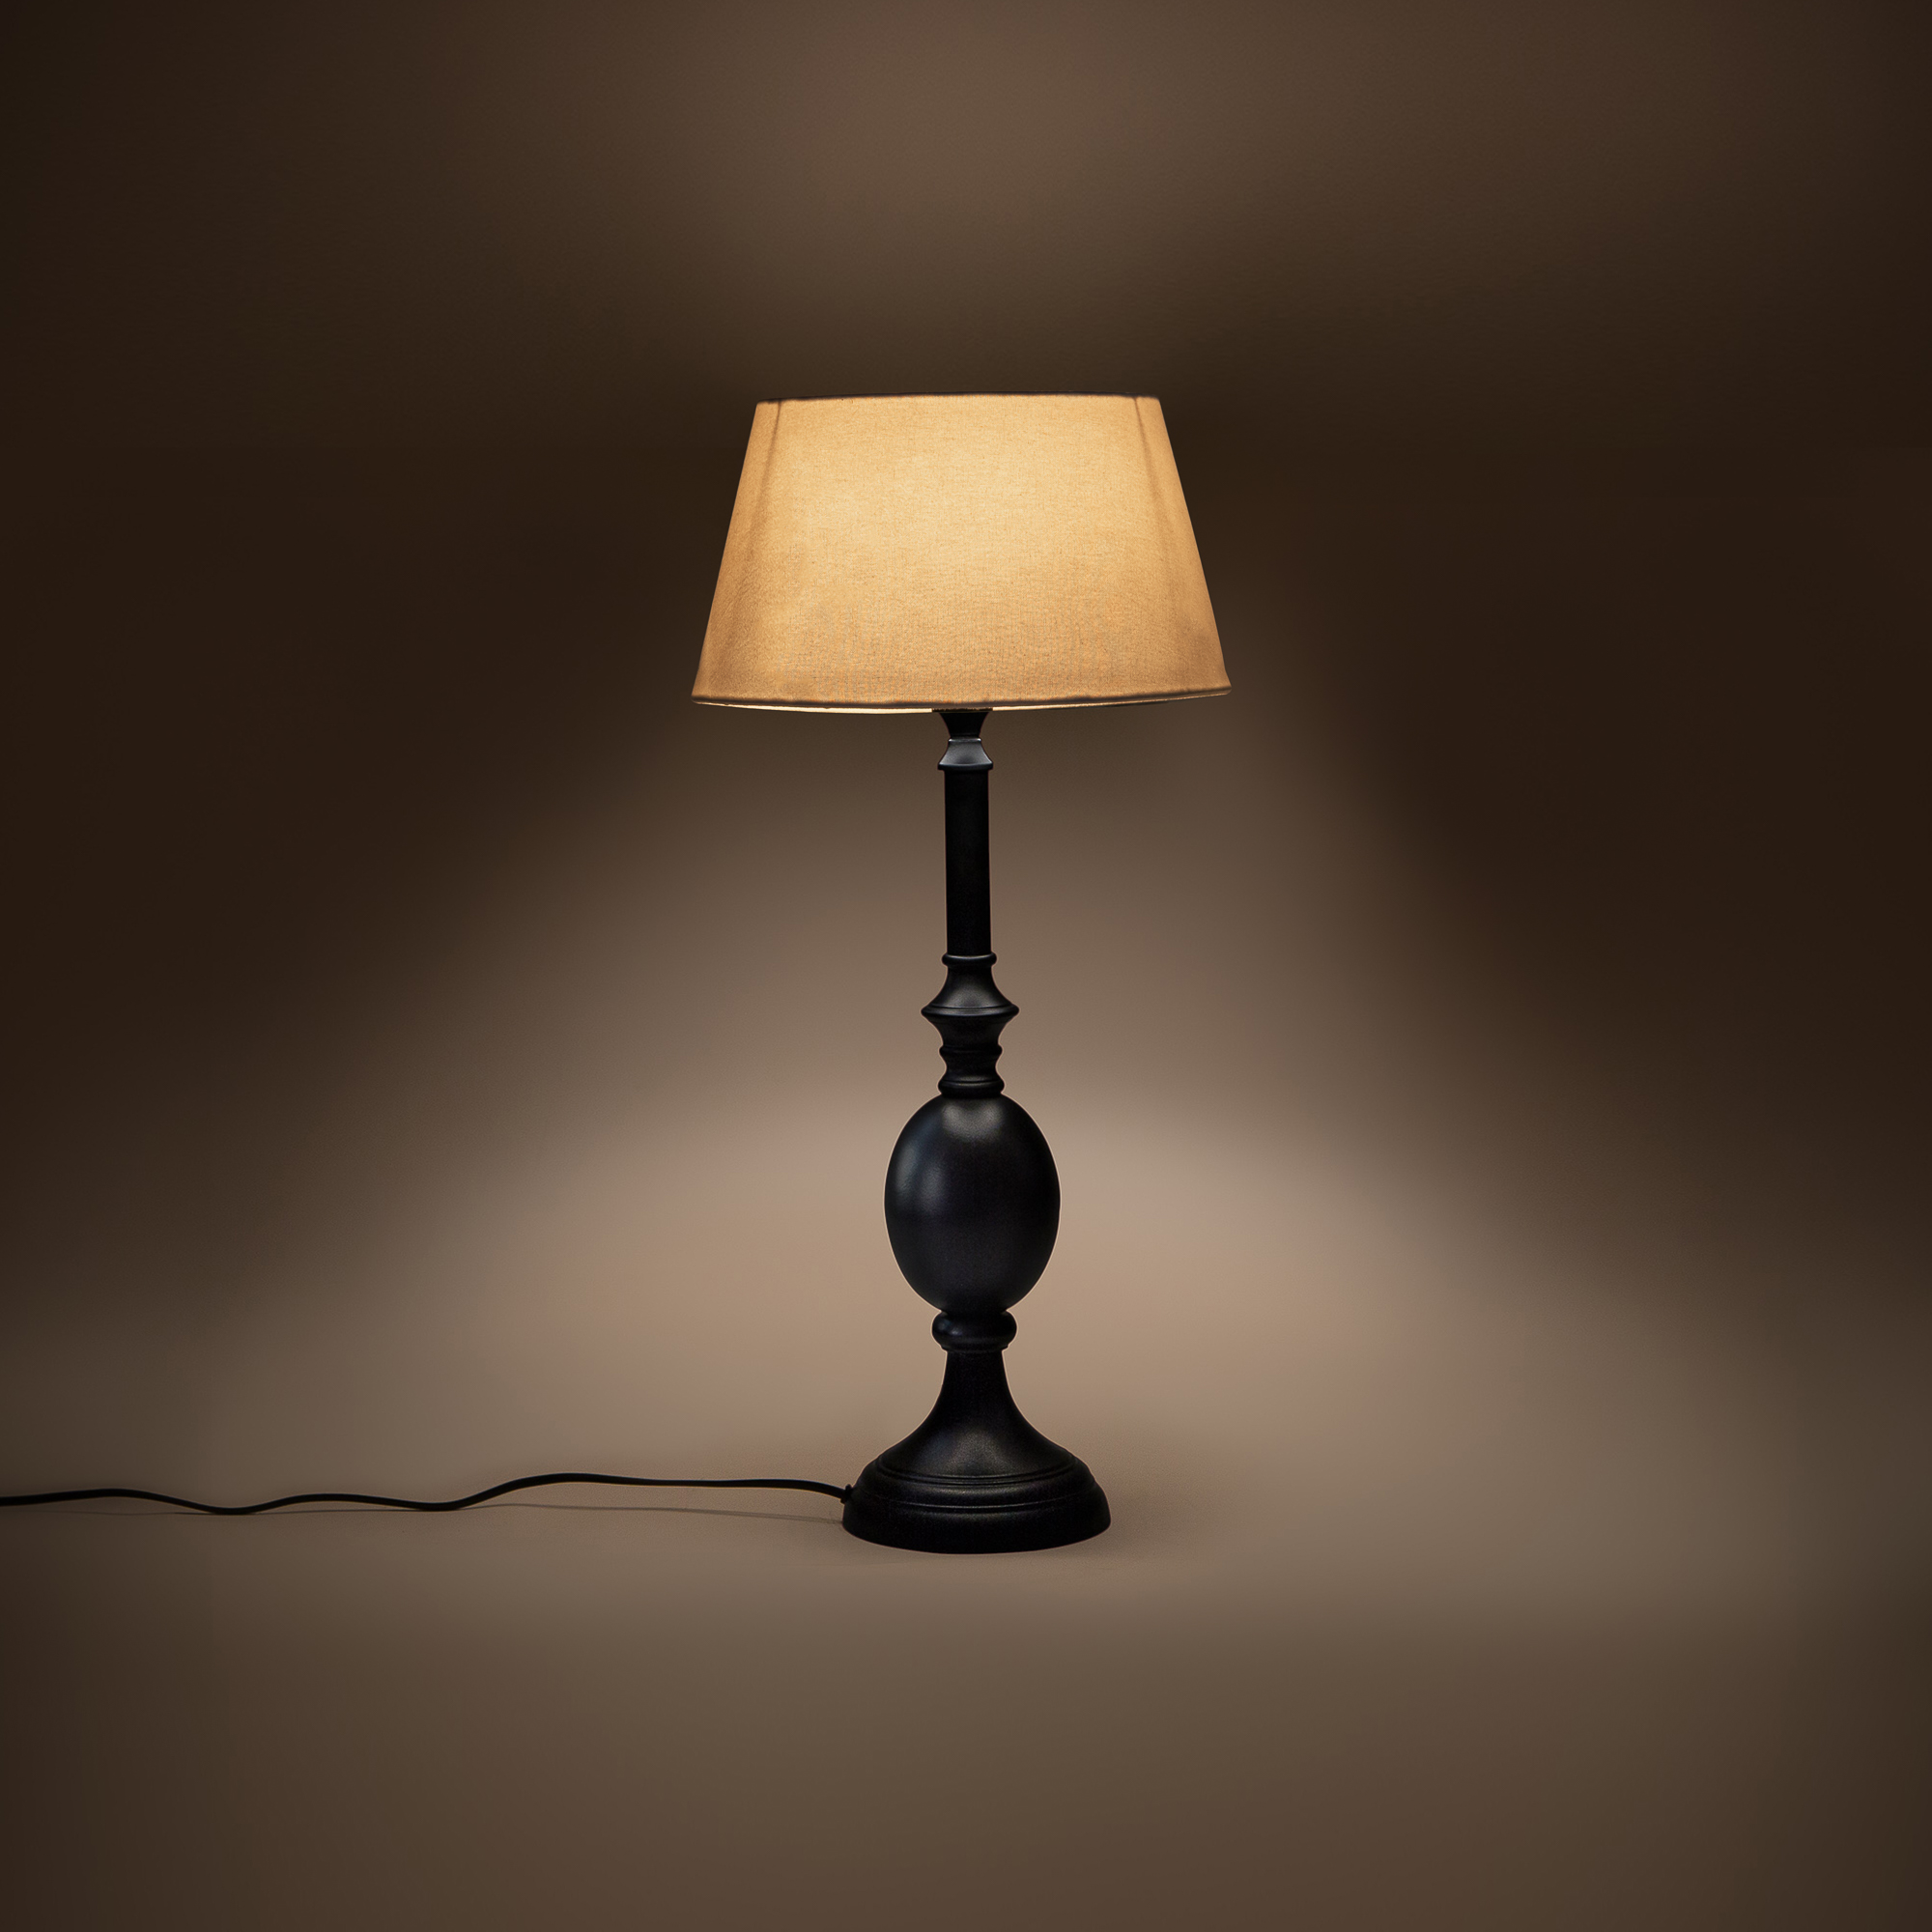 French Country Table Lamp Stand -  Ebony